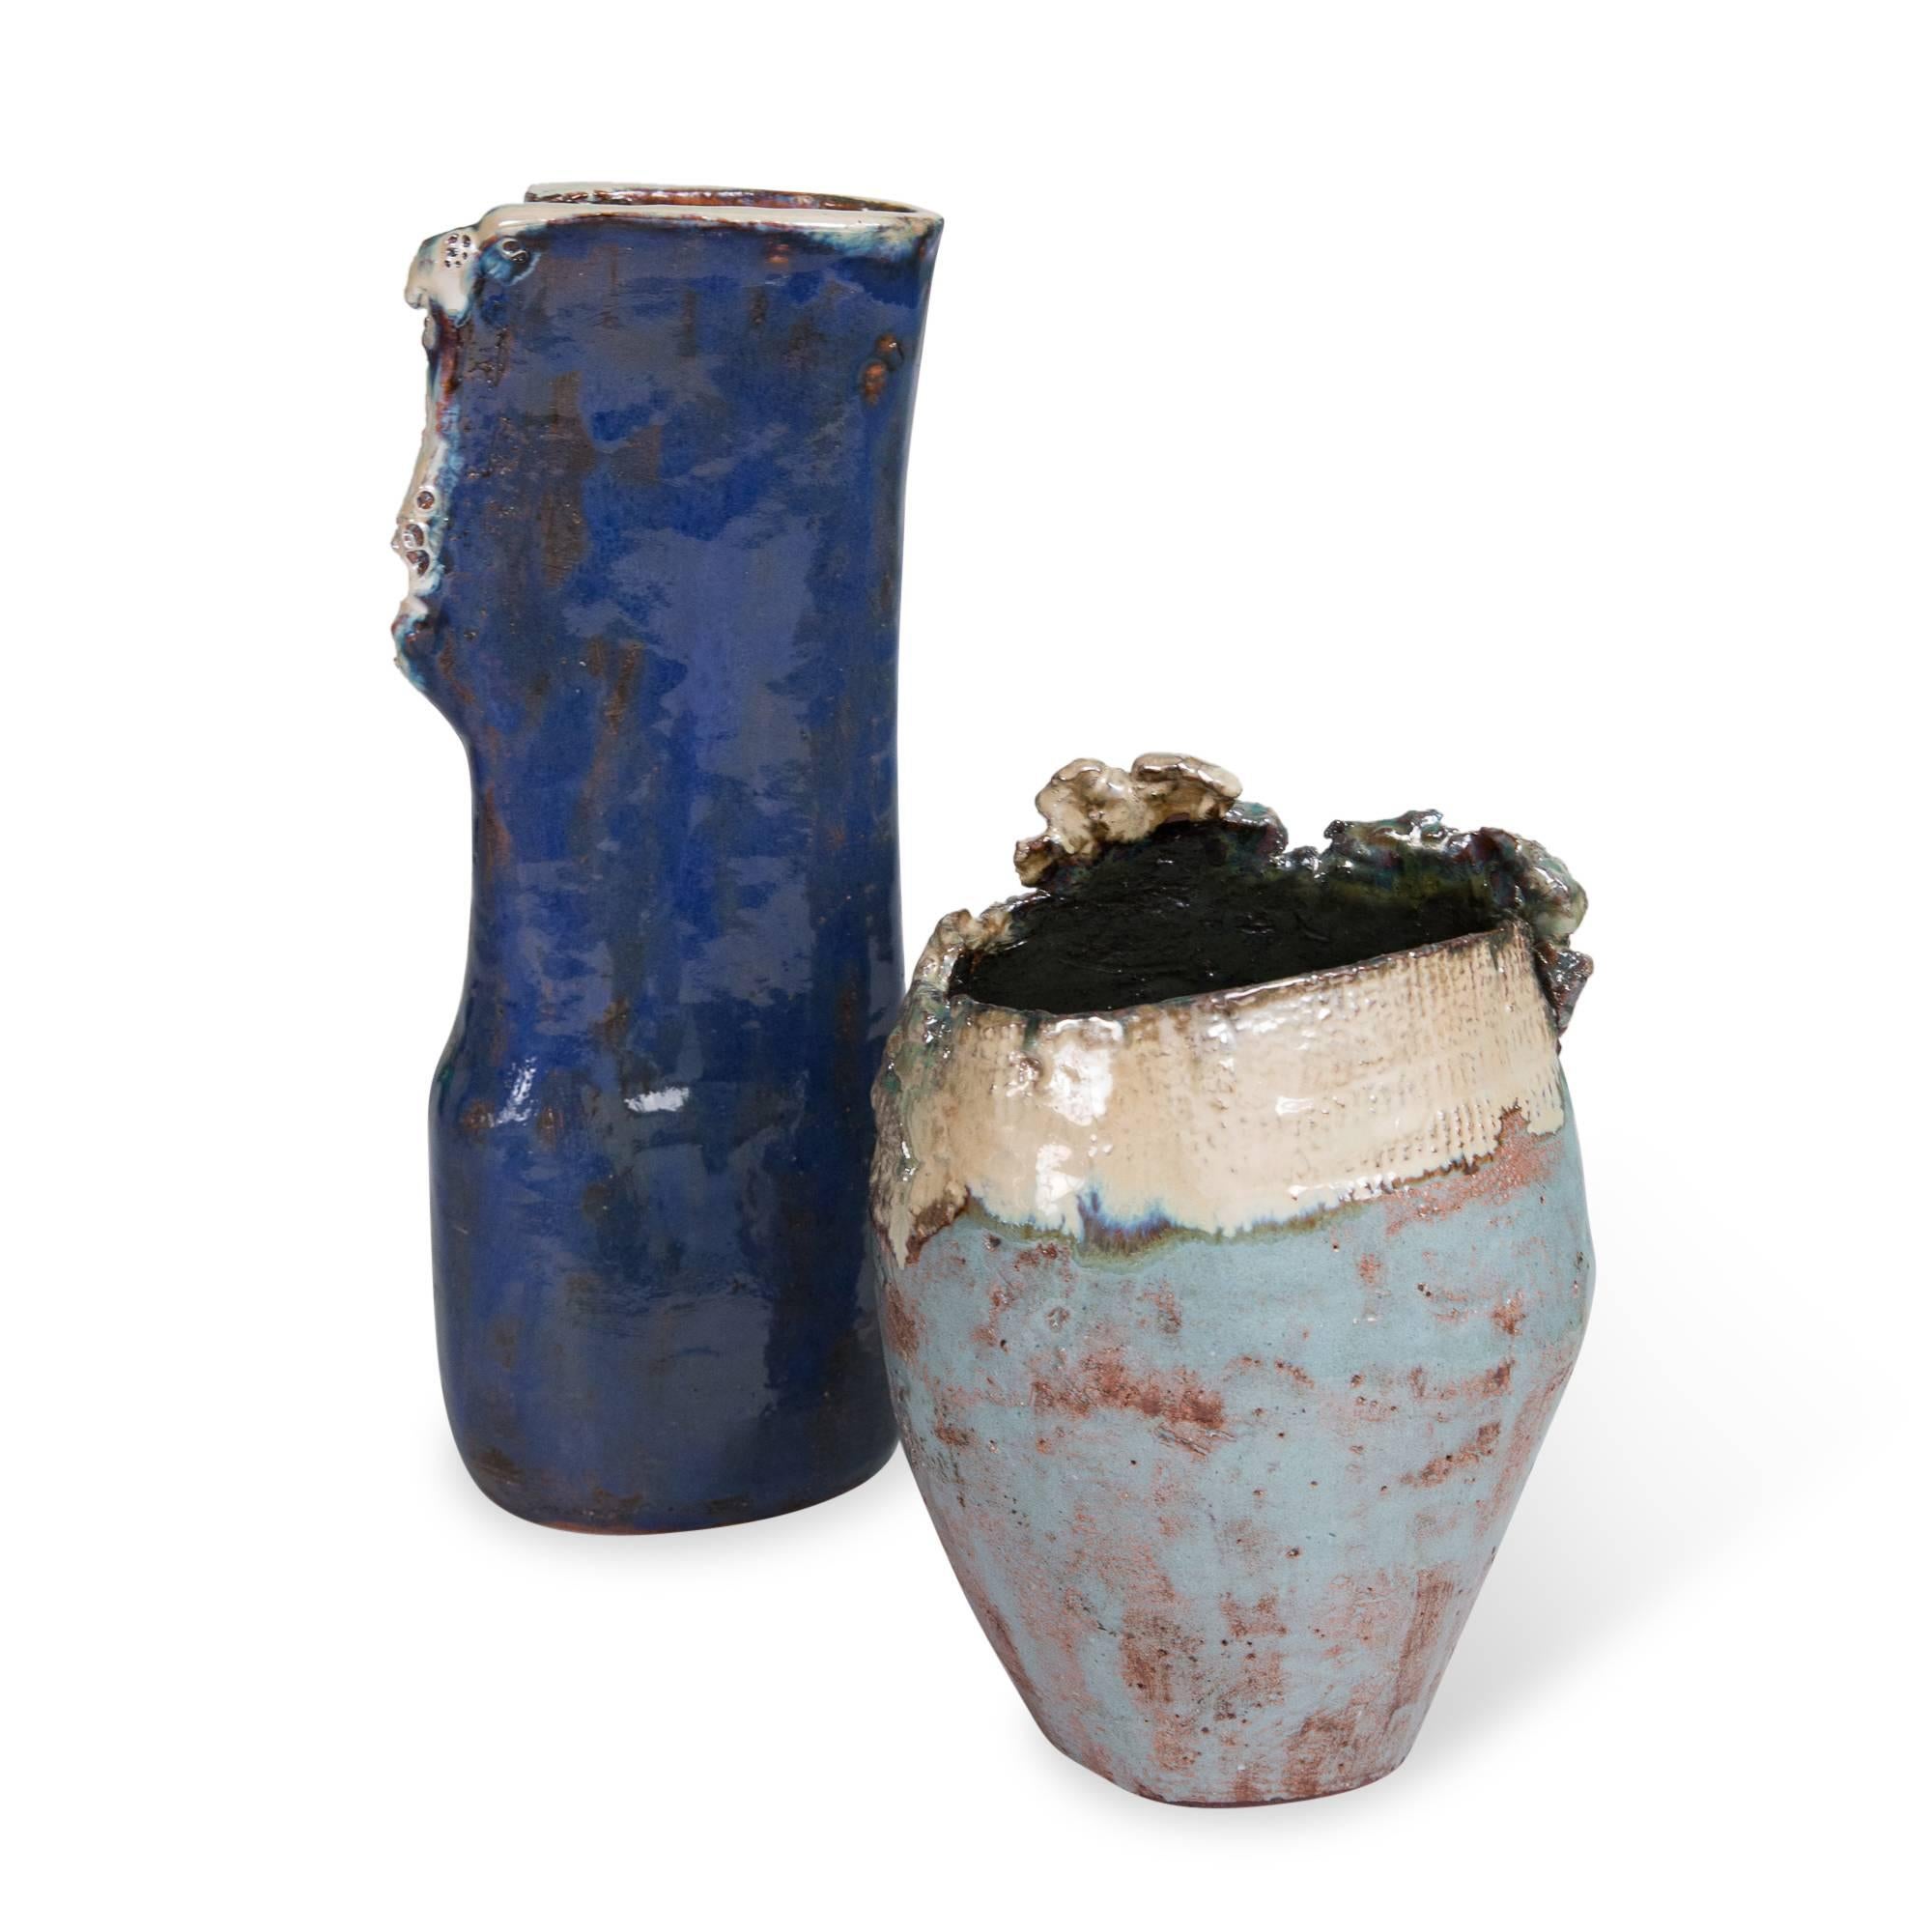 Set of two:
On left:
Blue glazed ceramic vase, with rough opening at top and side, and silver glaze accents, by Juliette Derel, France, late 20th century. Incised signature to underside. Measures: Height 12 in, width 5 in, depth 3 in.

On right: